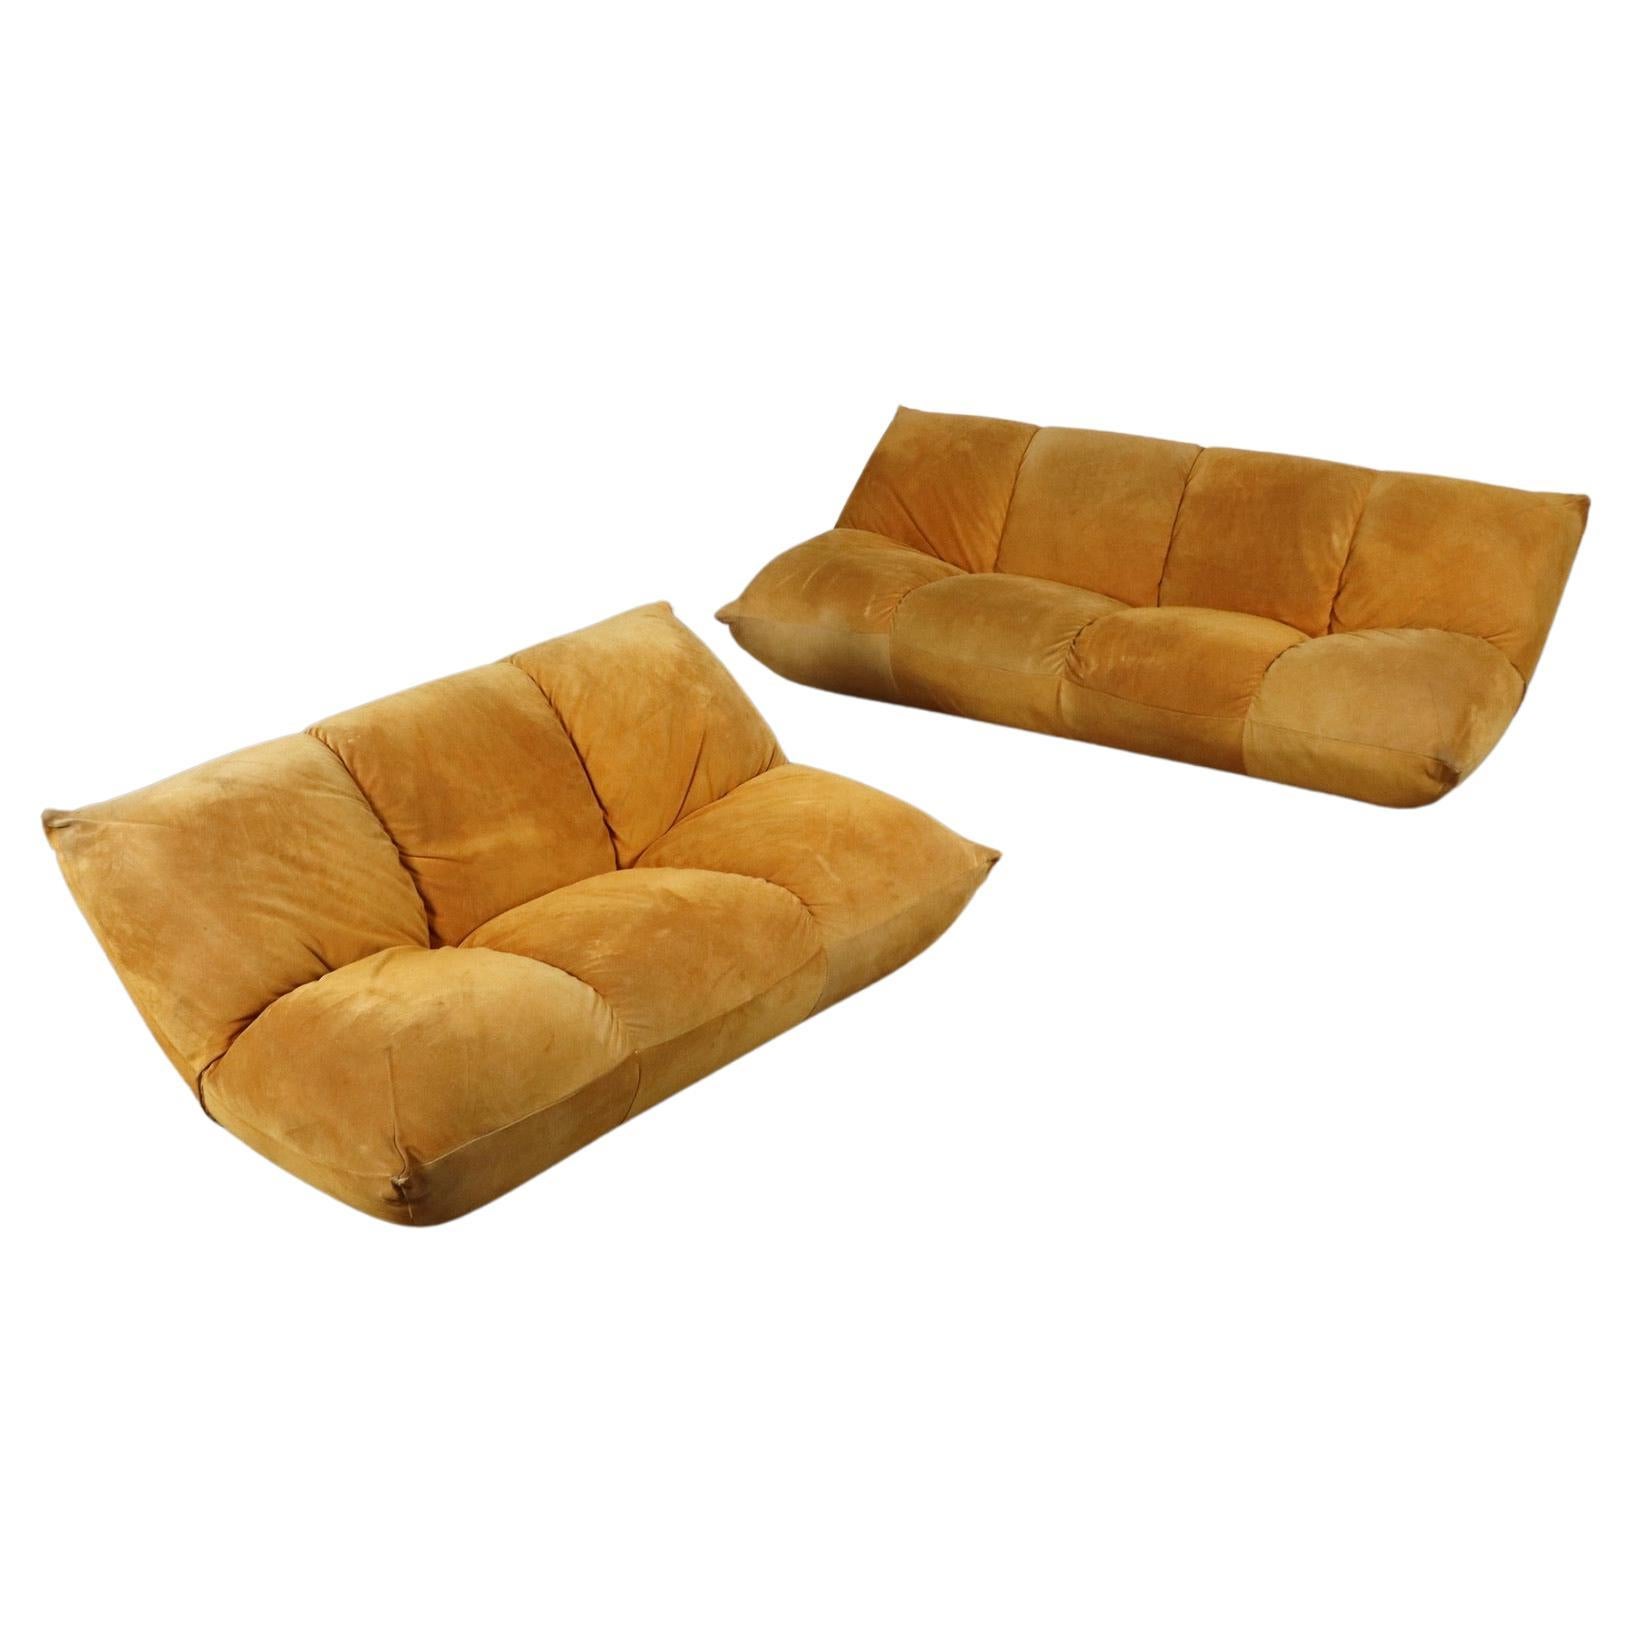 Pair Of Vintage Papillon Sofas In Suede By Guido Rosati For Giovannetti, 1970s